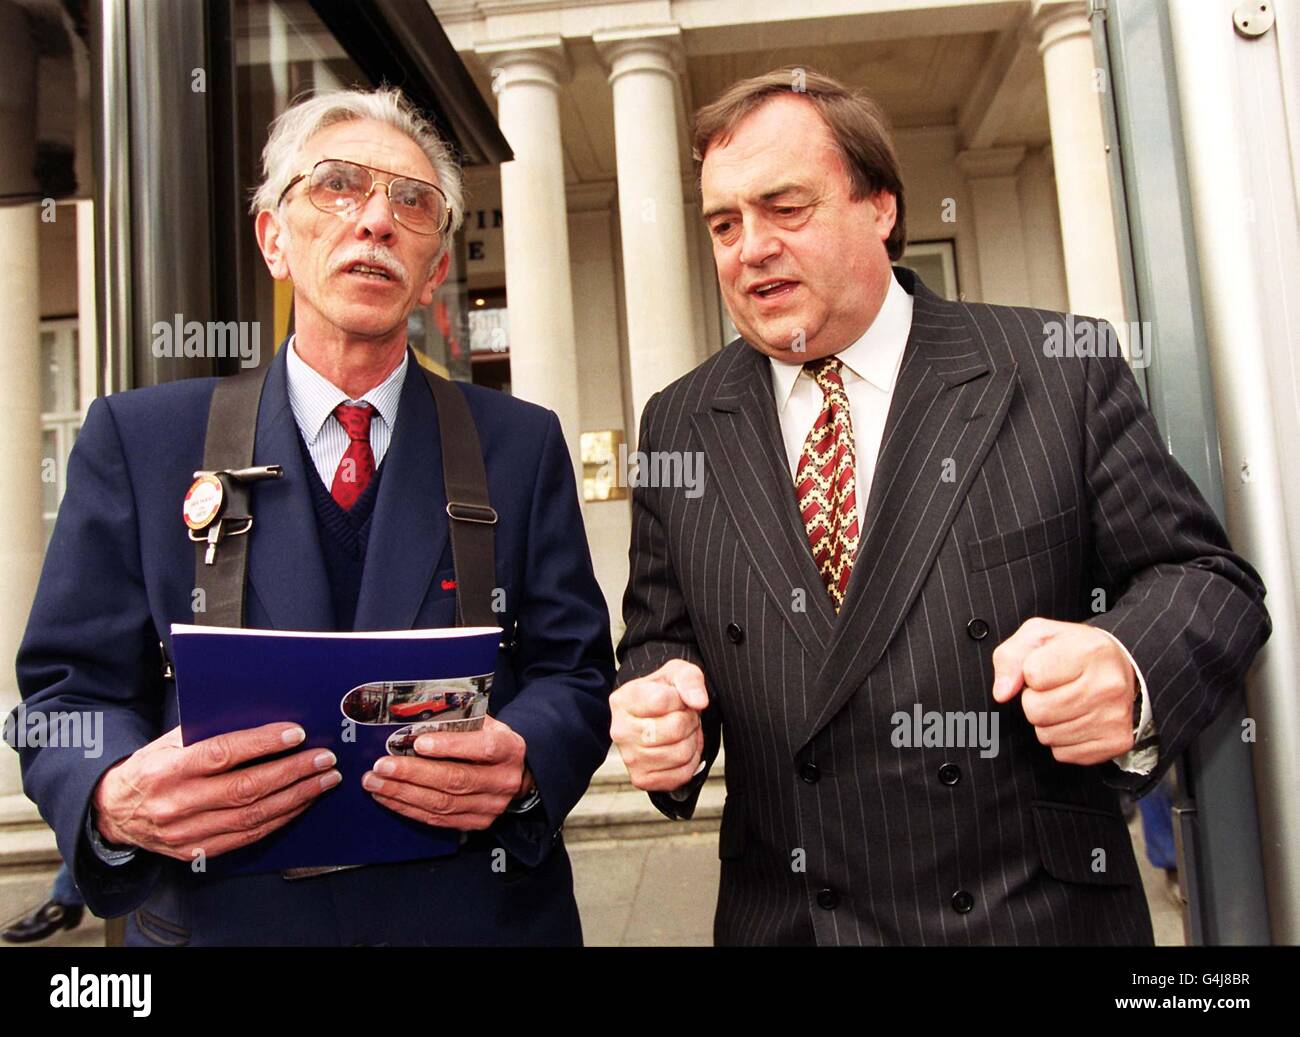 Deputy Prime Minister John Prescott with bus conductor Ian McKay of the Centre West Bus Company in central London after he launched a document entitled From Workhorse to Thoroughbred , a policy statement on buses. * which is a follow-up to the Government's transport White Paper published last year. The document proposes a guaranteed concession of at least half-fare on local buses in England Wales, but on payment of an annual fee of up to 5. Scotland s concessionary fares will be a matter for the Scottish Parliament. Stock Photo